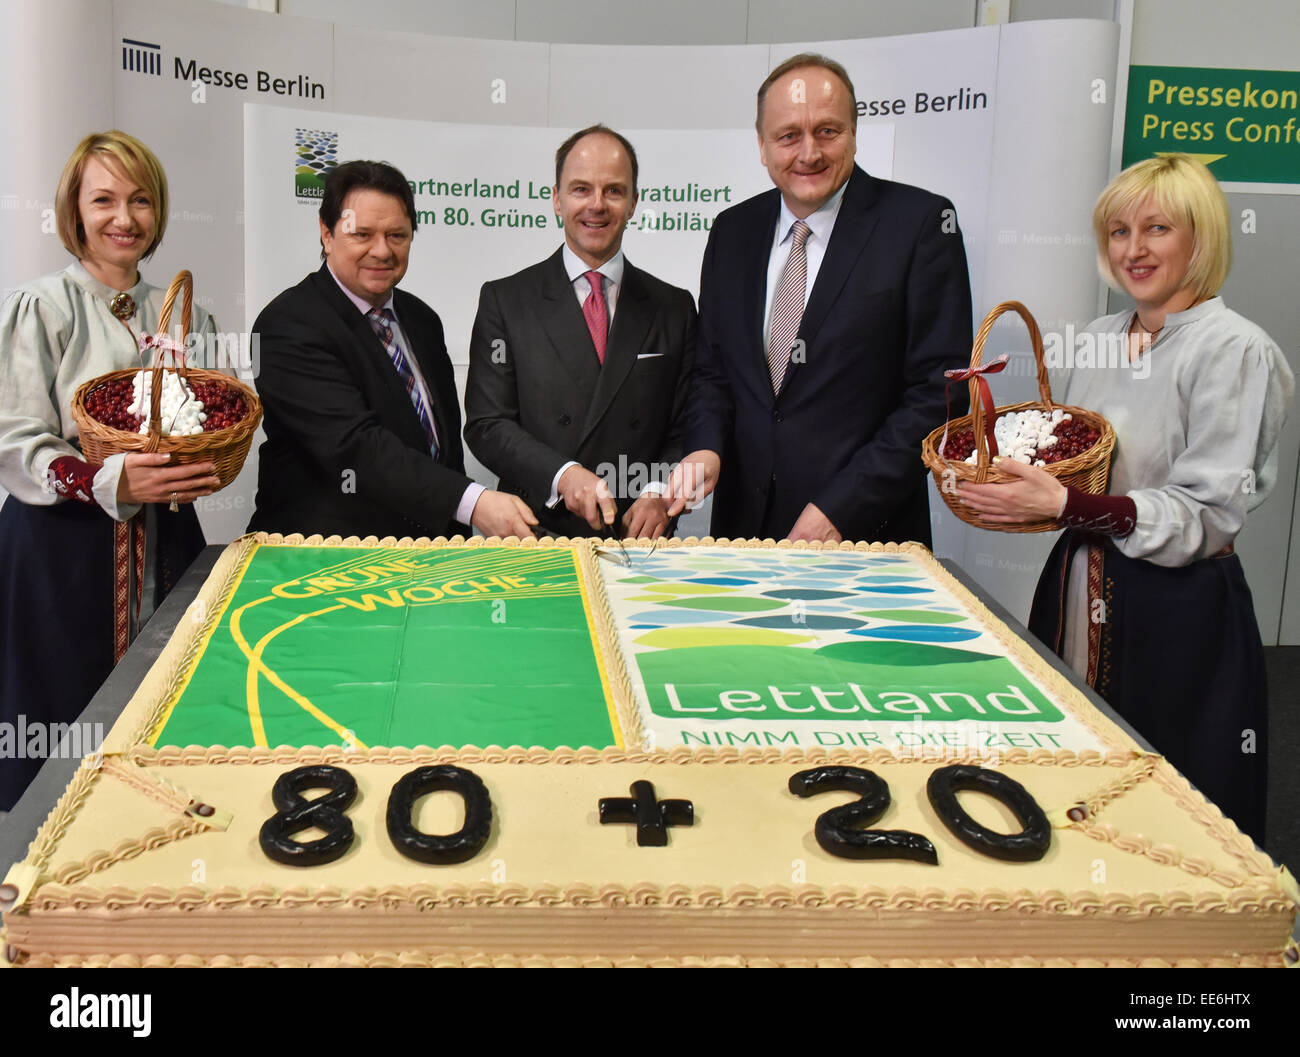 Christoph Minhoff (manager of the umbrella association of the food industry, L-R), Christian Goeke (manager of Messe Berlin) and Joachim Rukwied (President of the German Farmers' Association) cut a birthday cake together with Latvian hostesses before the beginning of the opening press conference of the 80th Green Week in Berlin, Germany, 14 January 2015. More than 1,600 exhibitors present their products in 26 hall complexes under the Funkturm Berlin from 16 until 25 January 2015. Latvia is this year's partner country. PHOTO: BERND SETTNIK/dpa Stock Photo